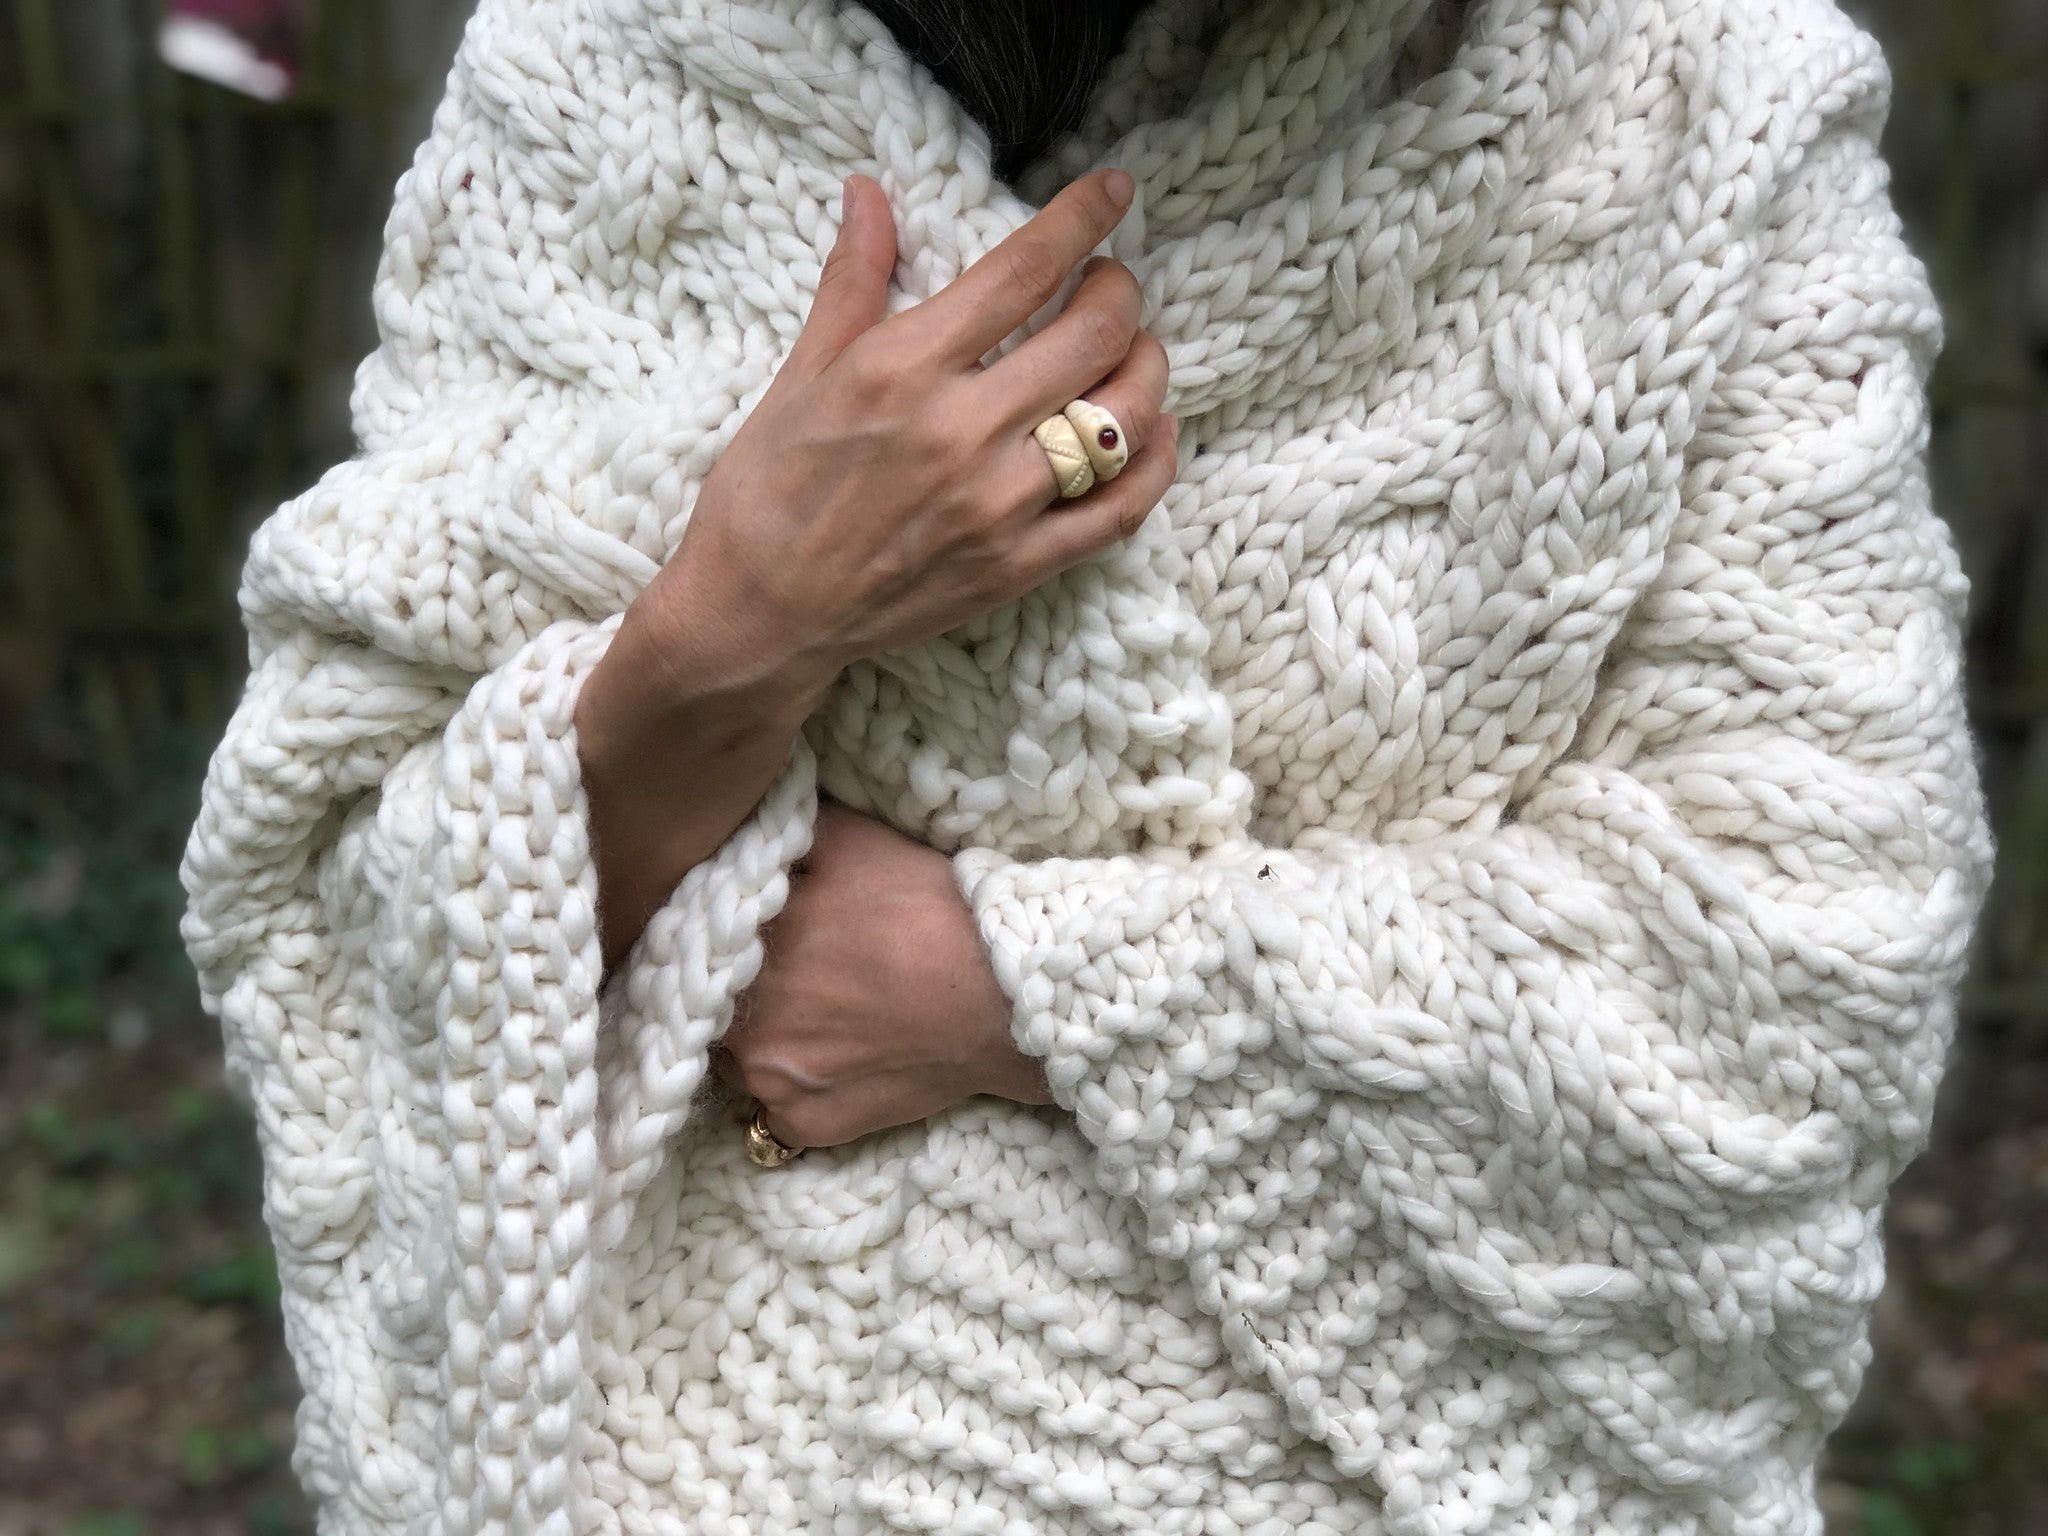 HOW TO HAND KNIT CABLE KNIT MERINO BLANKET 